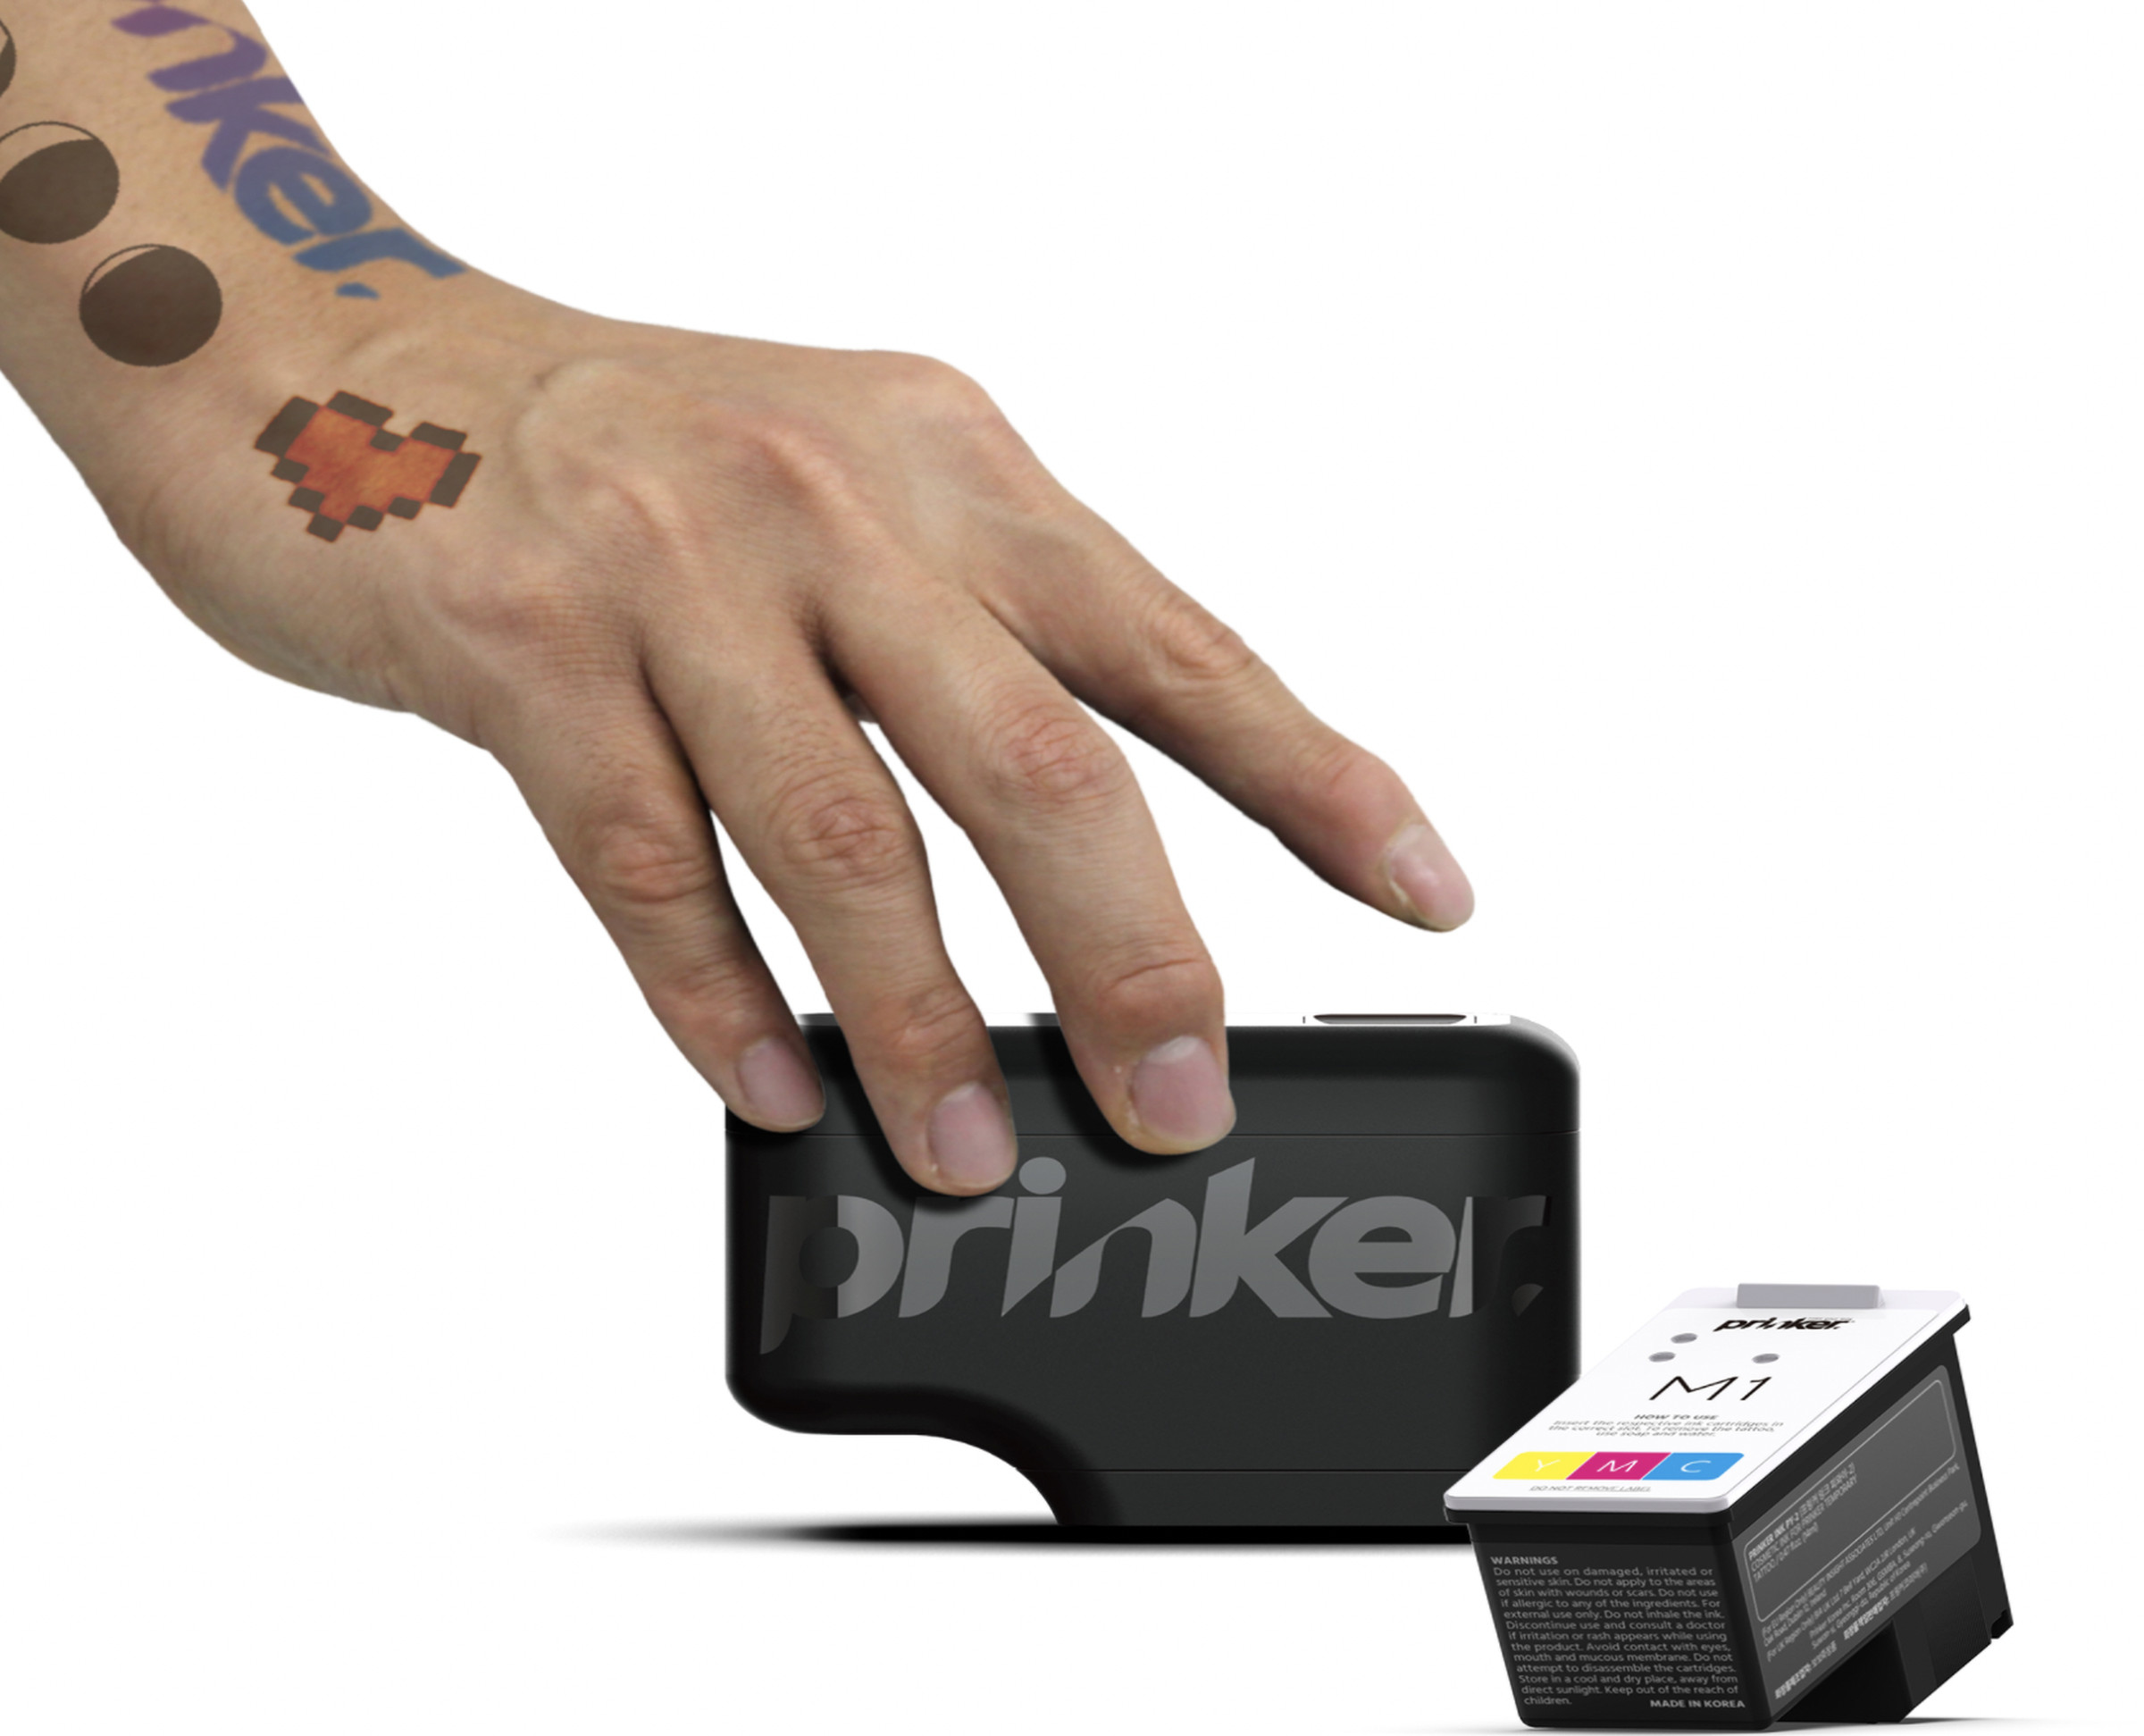 Hand holding a prinker device with an ink packet